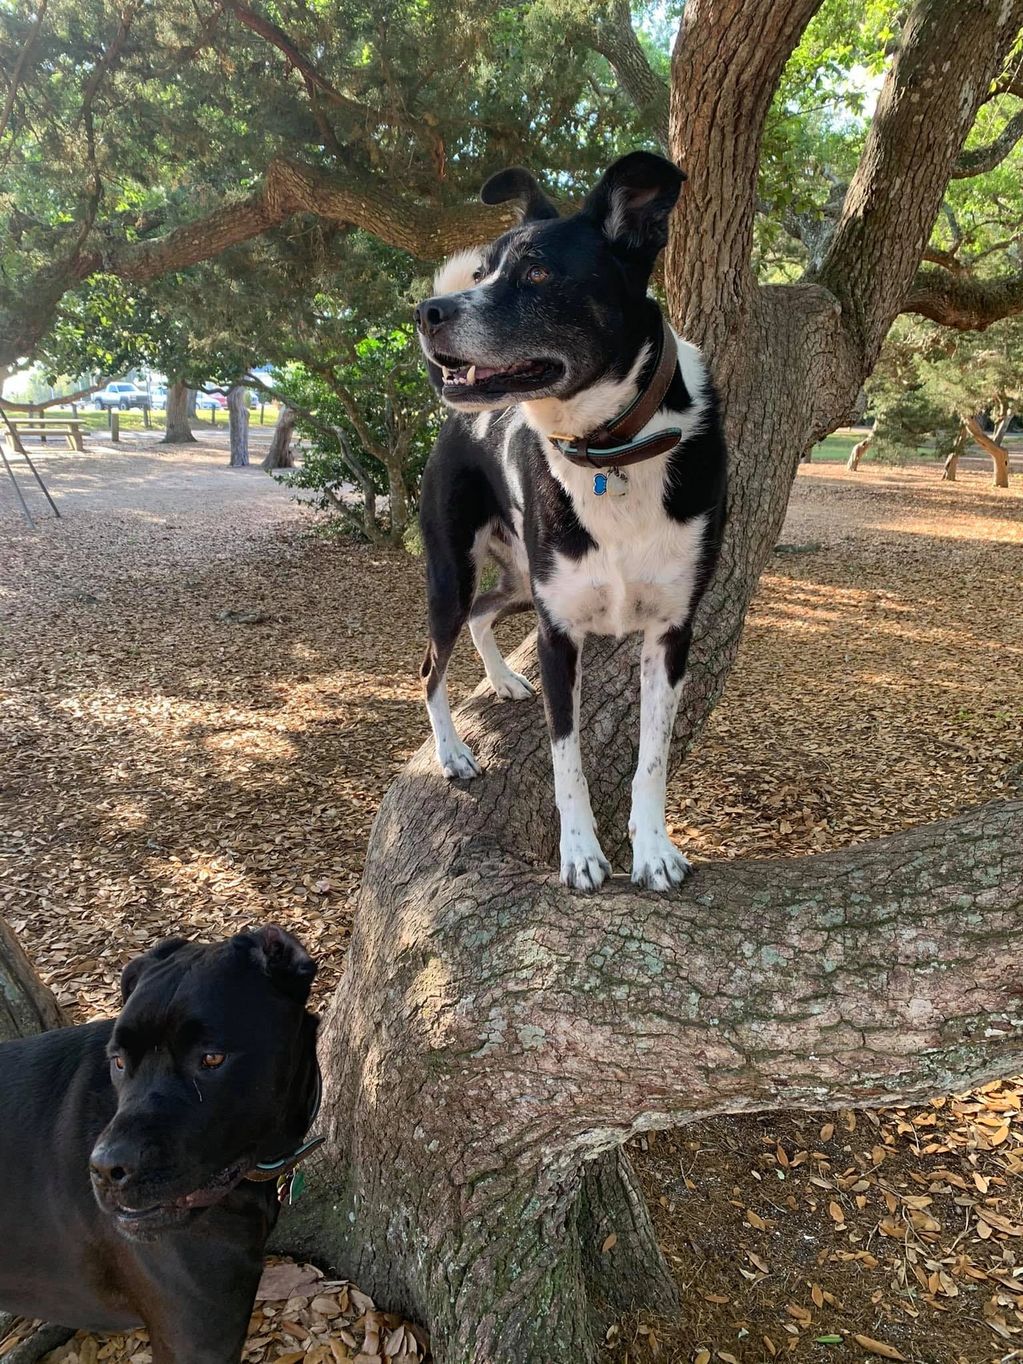 Pepper thinks he's a cat and loves agility and climbing trees